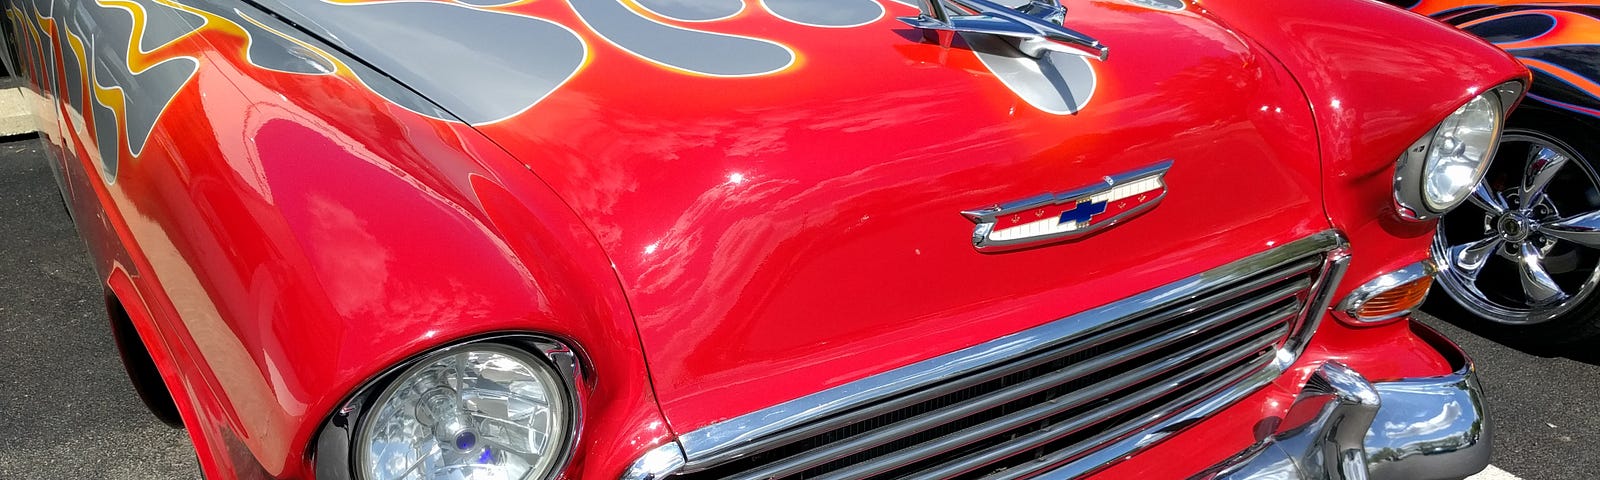 This shows an old hotrod red car with gray flames on the hood.